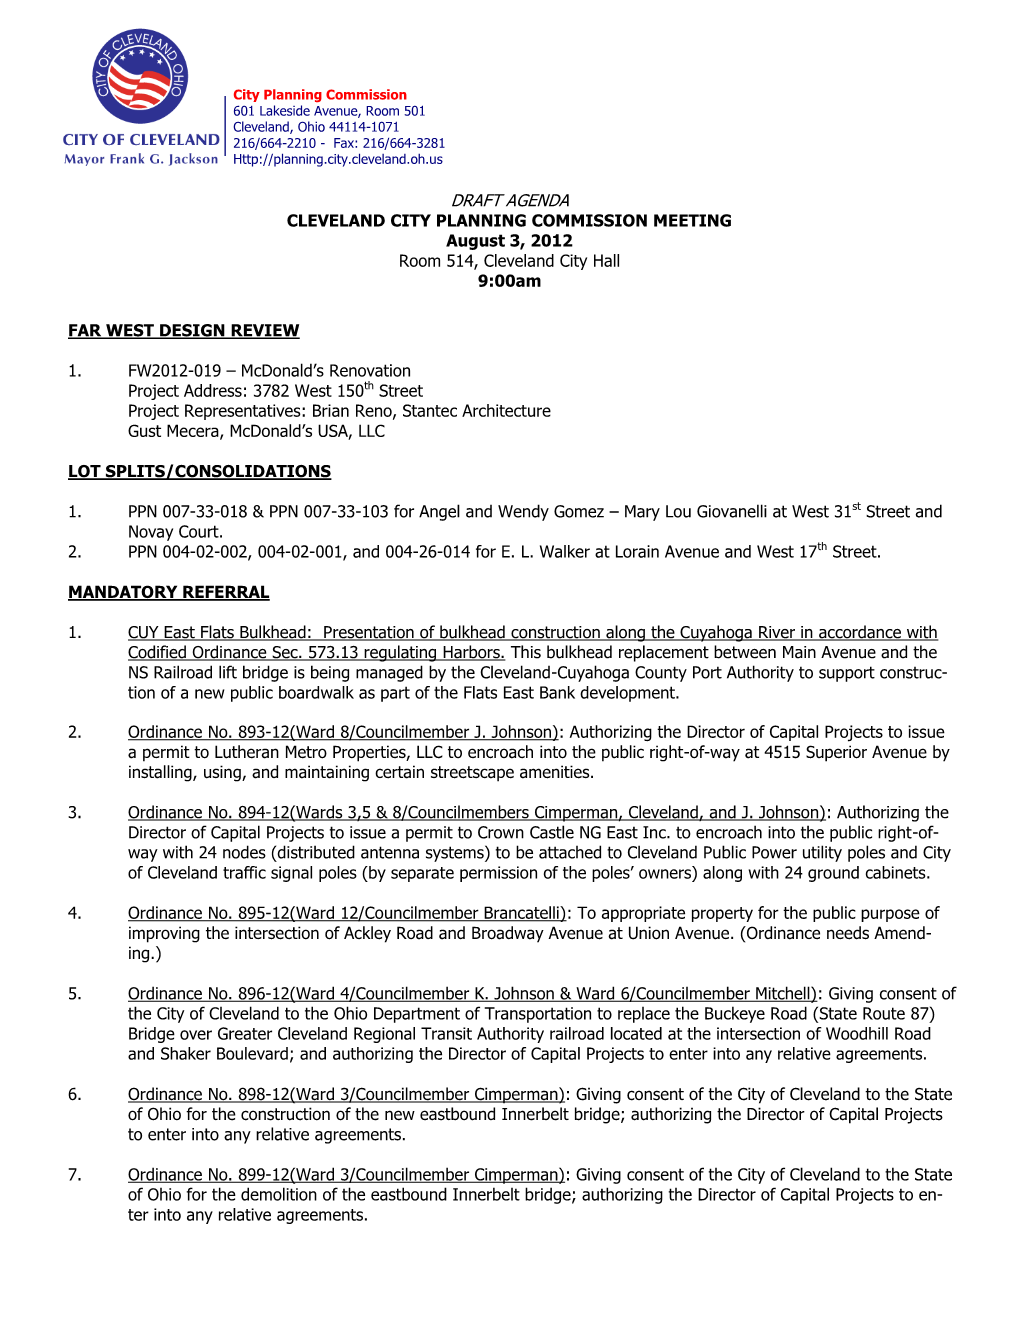 DRAFT AGENDA CLEVELAND CITY PLANNING COMMISSION MEETING August 3, 2012 Room 514, Cleveland City Hall 9:00Am